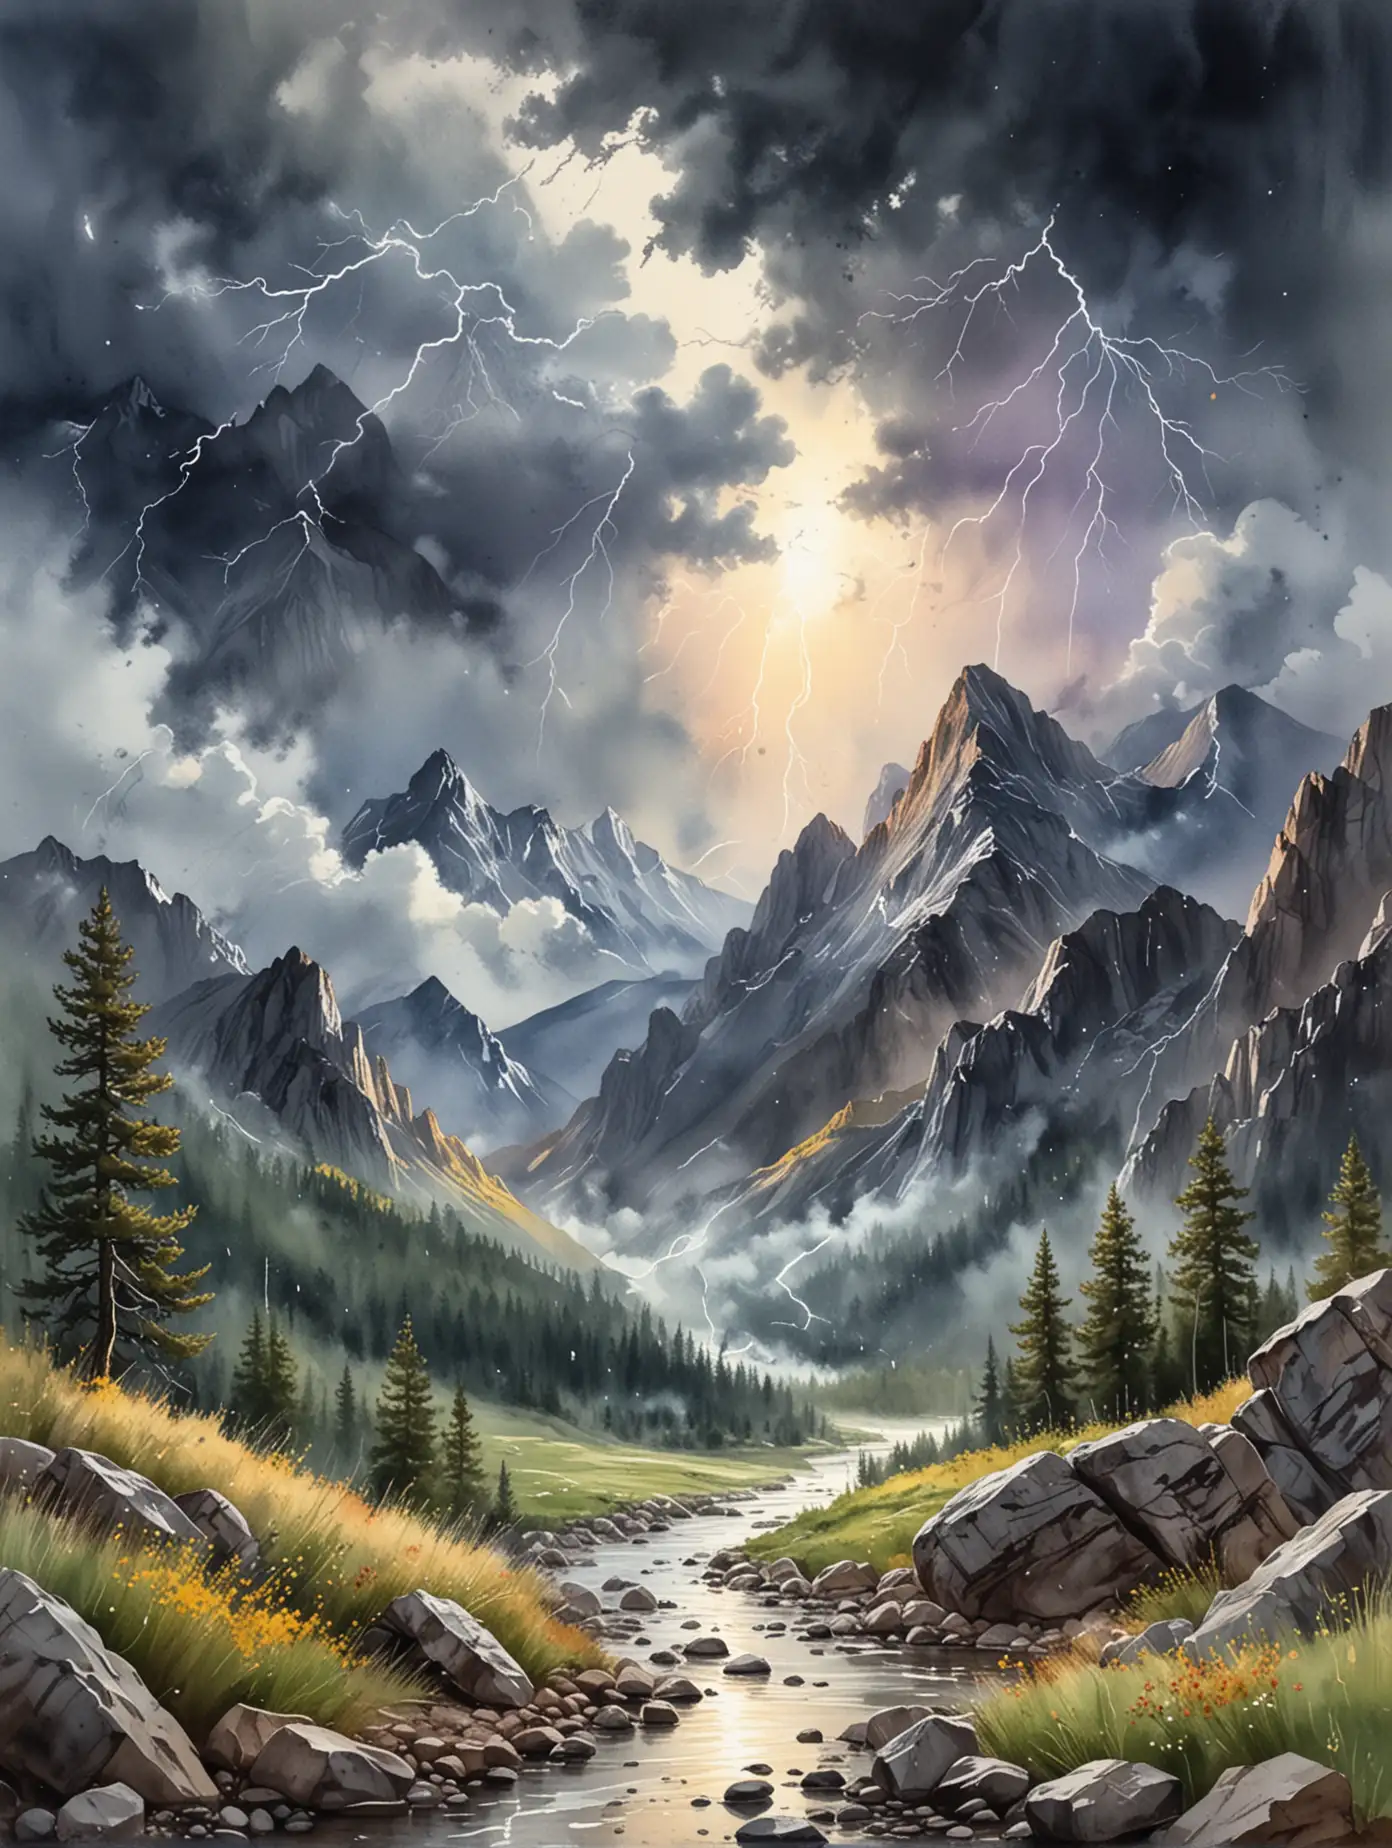 Vivid Watercolor Painting of Thunderous Mountains with Lightning Bolts